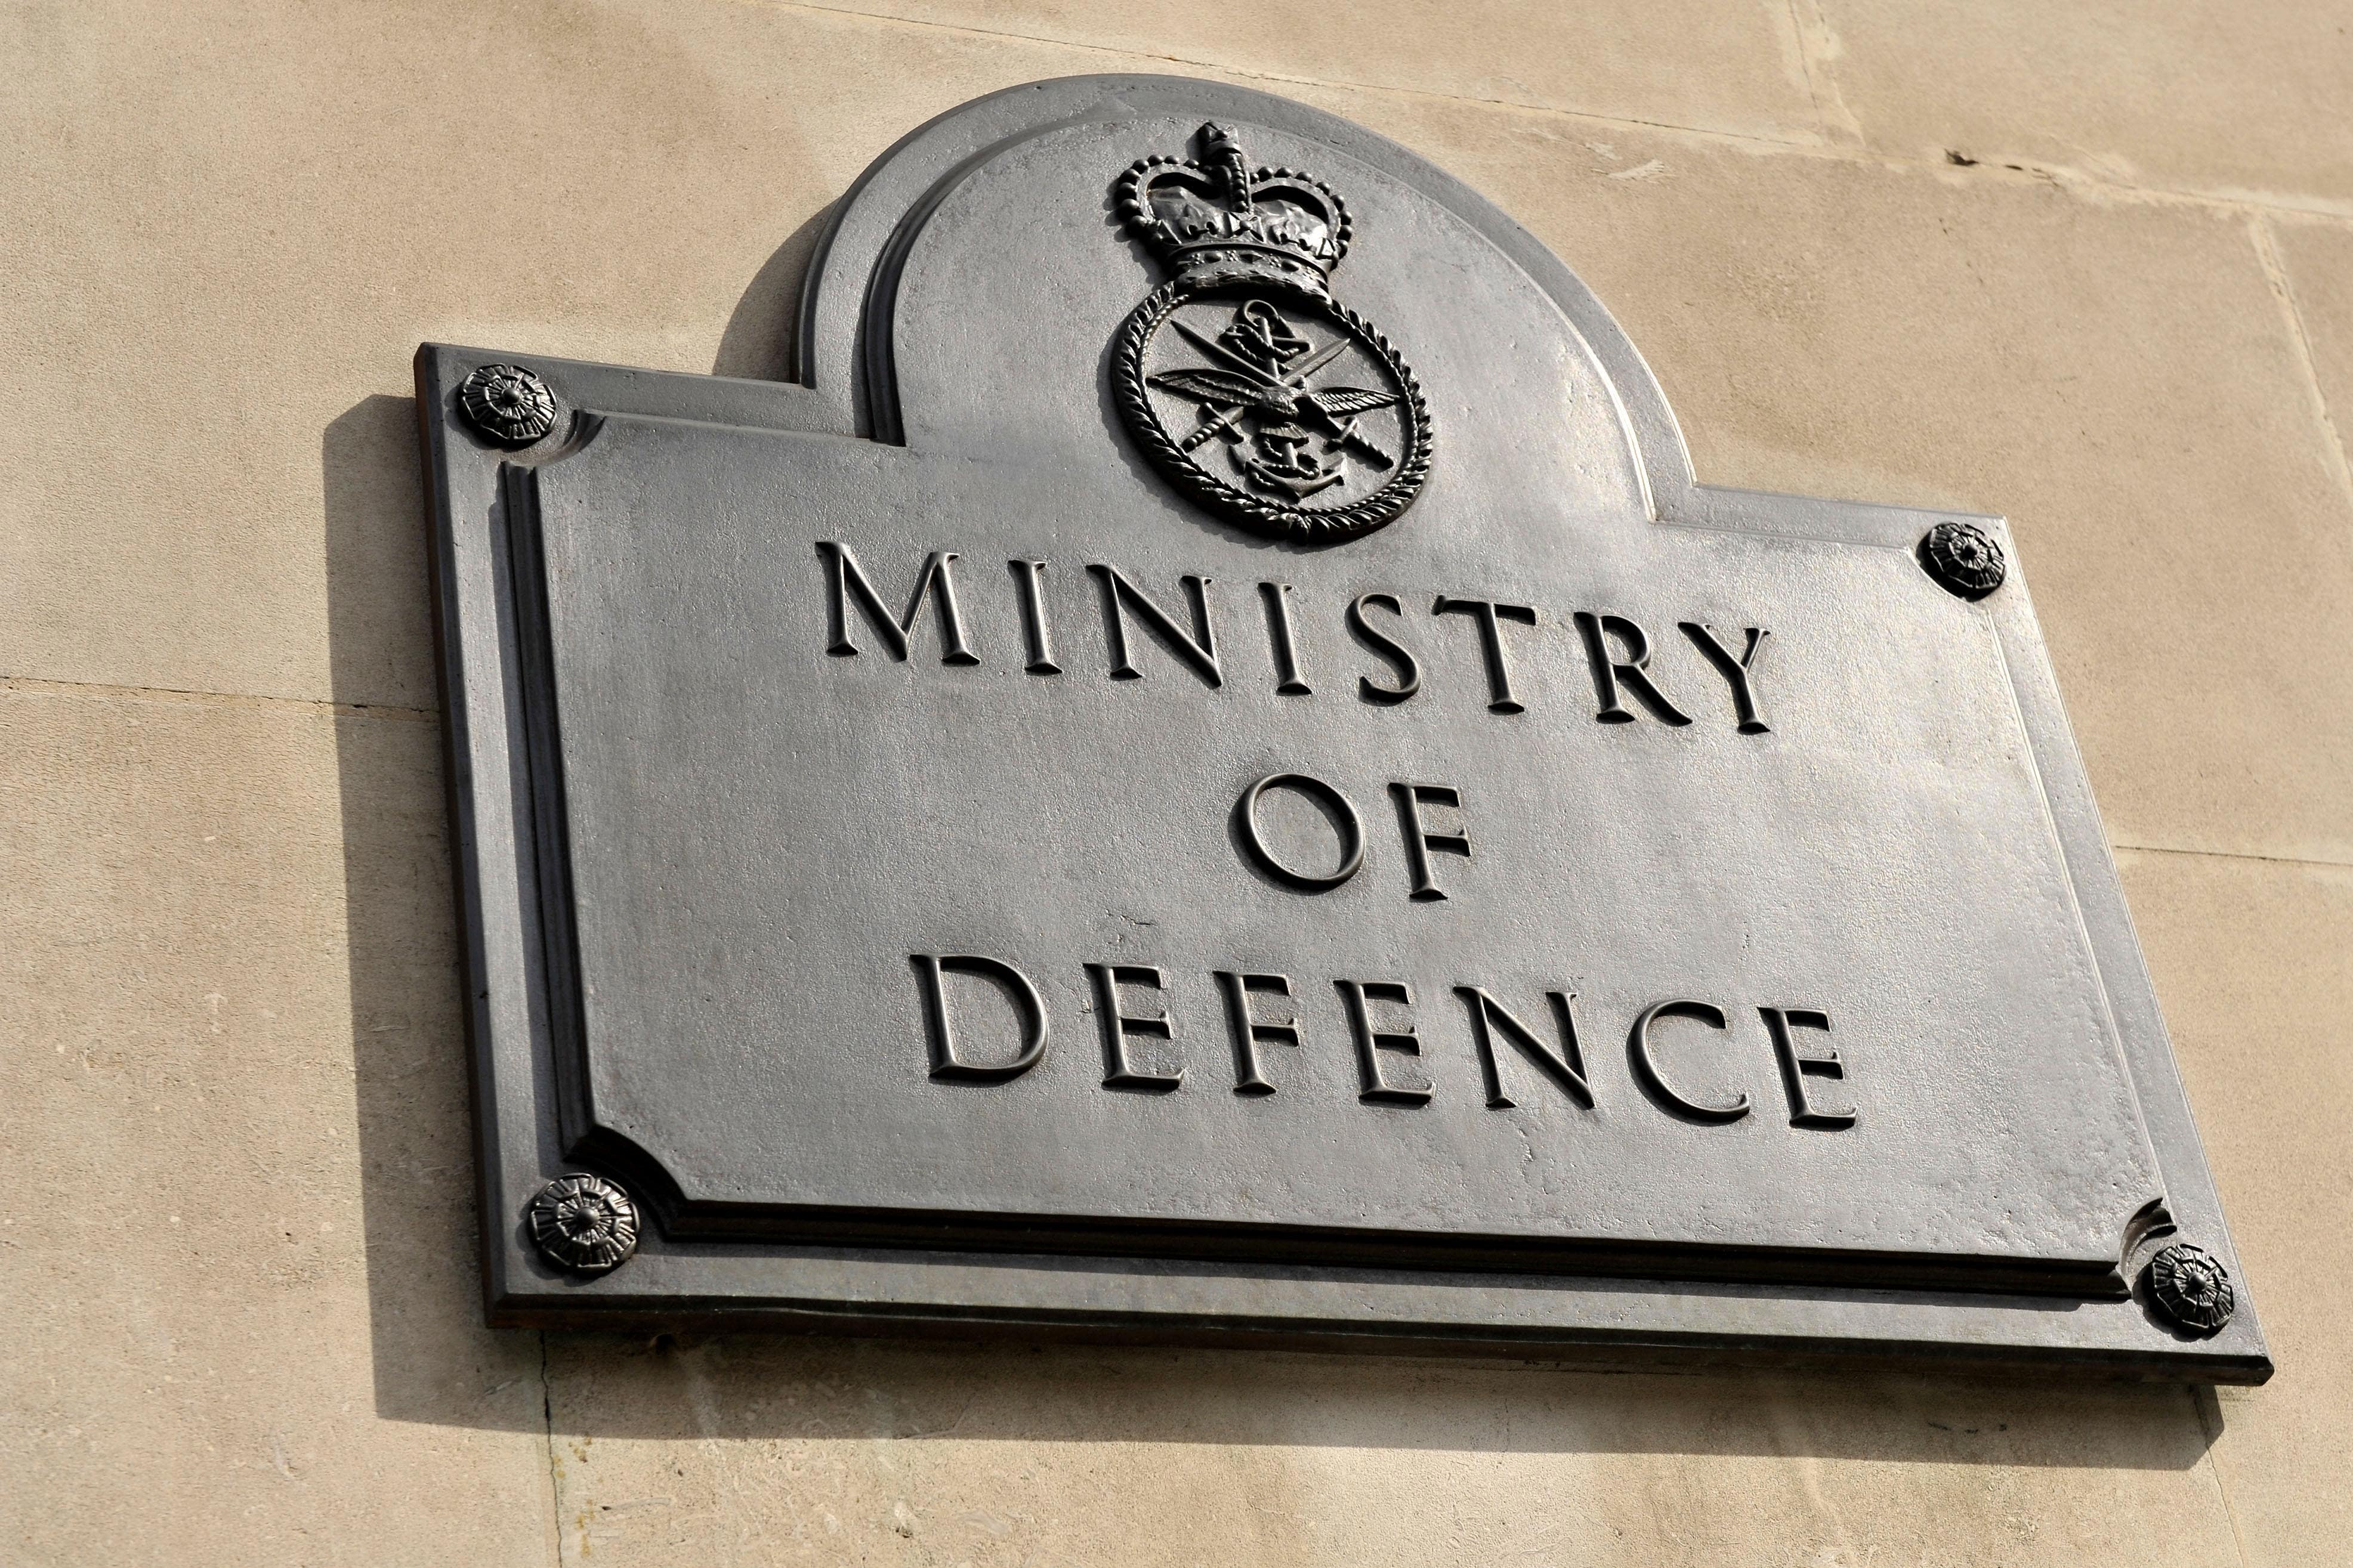 The Information Commissioner’s Office issued an enforcement notice to the Ministry of Defence earlier this year (Tim Ireland/PA)